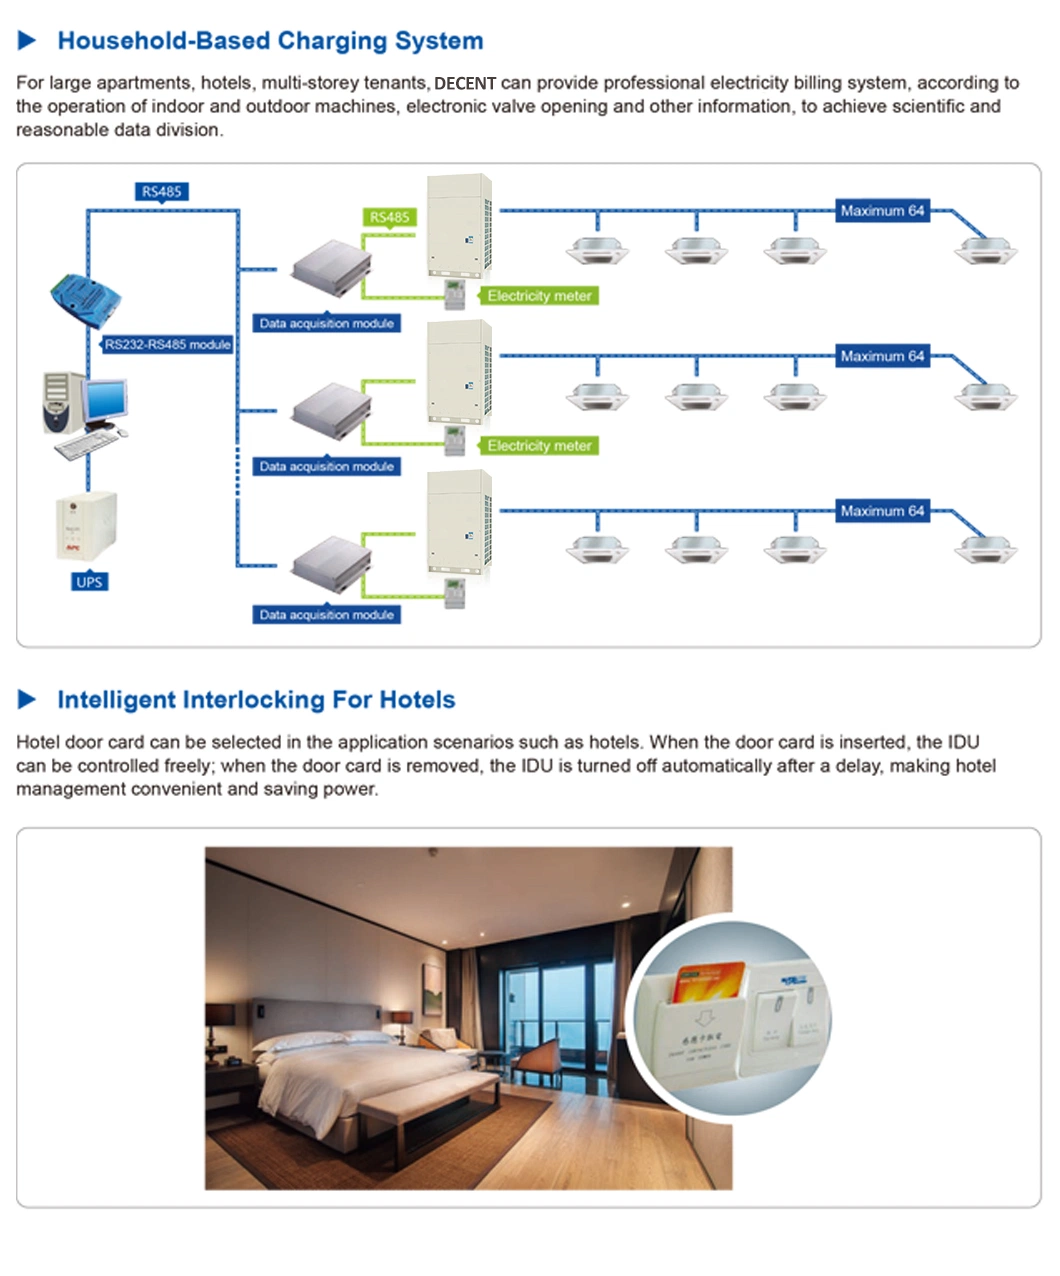 Single Cooling and Multiple Connection (Outdoor Unit) Solution with High Static Pressure/Large Capacity Ducted Indoor Unit for Efficient Cooling in Commercial S